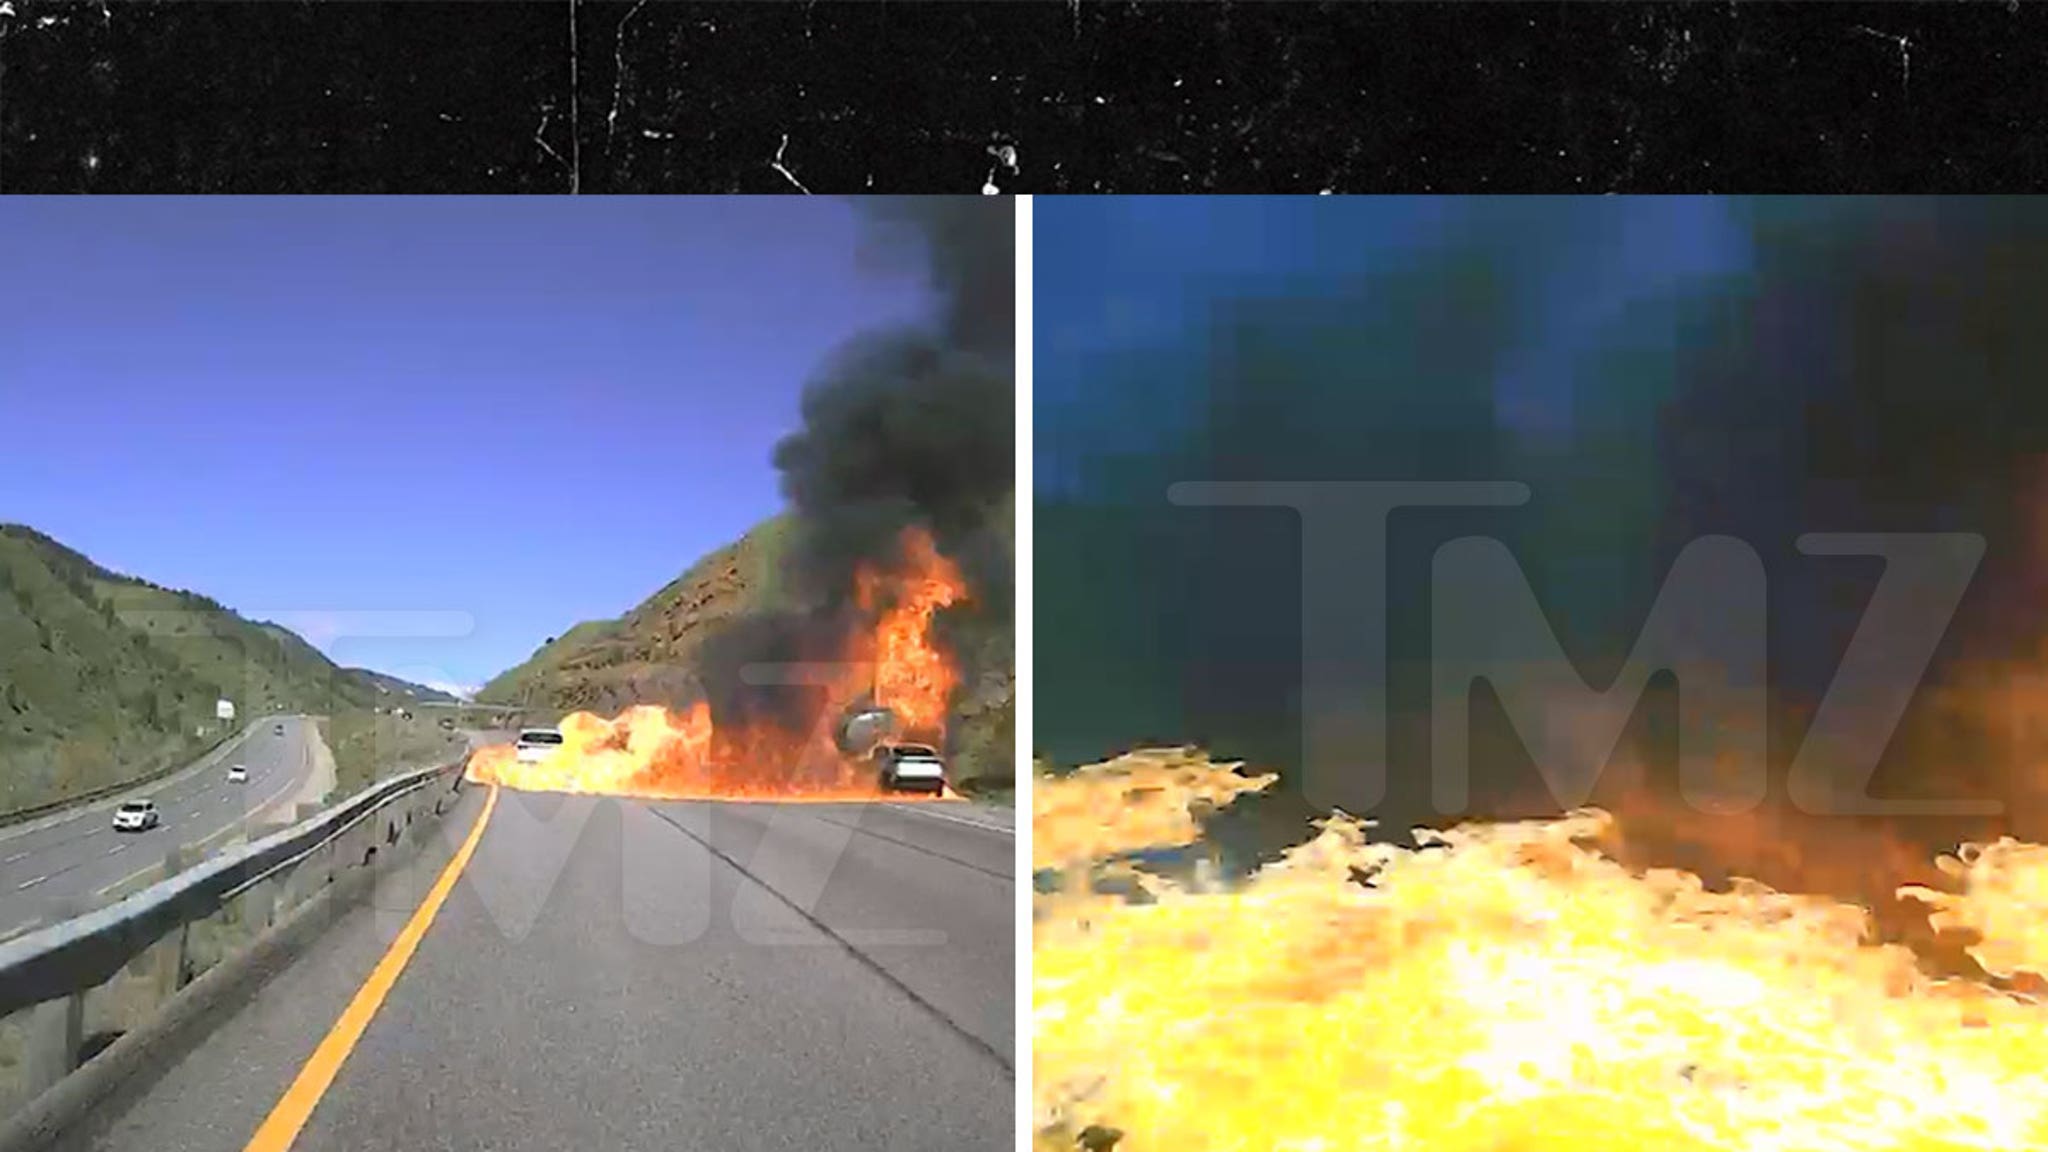 Driver in Colorado Drives Through Massive Fireball After Tanker Crash Captured on Dashcam Video